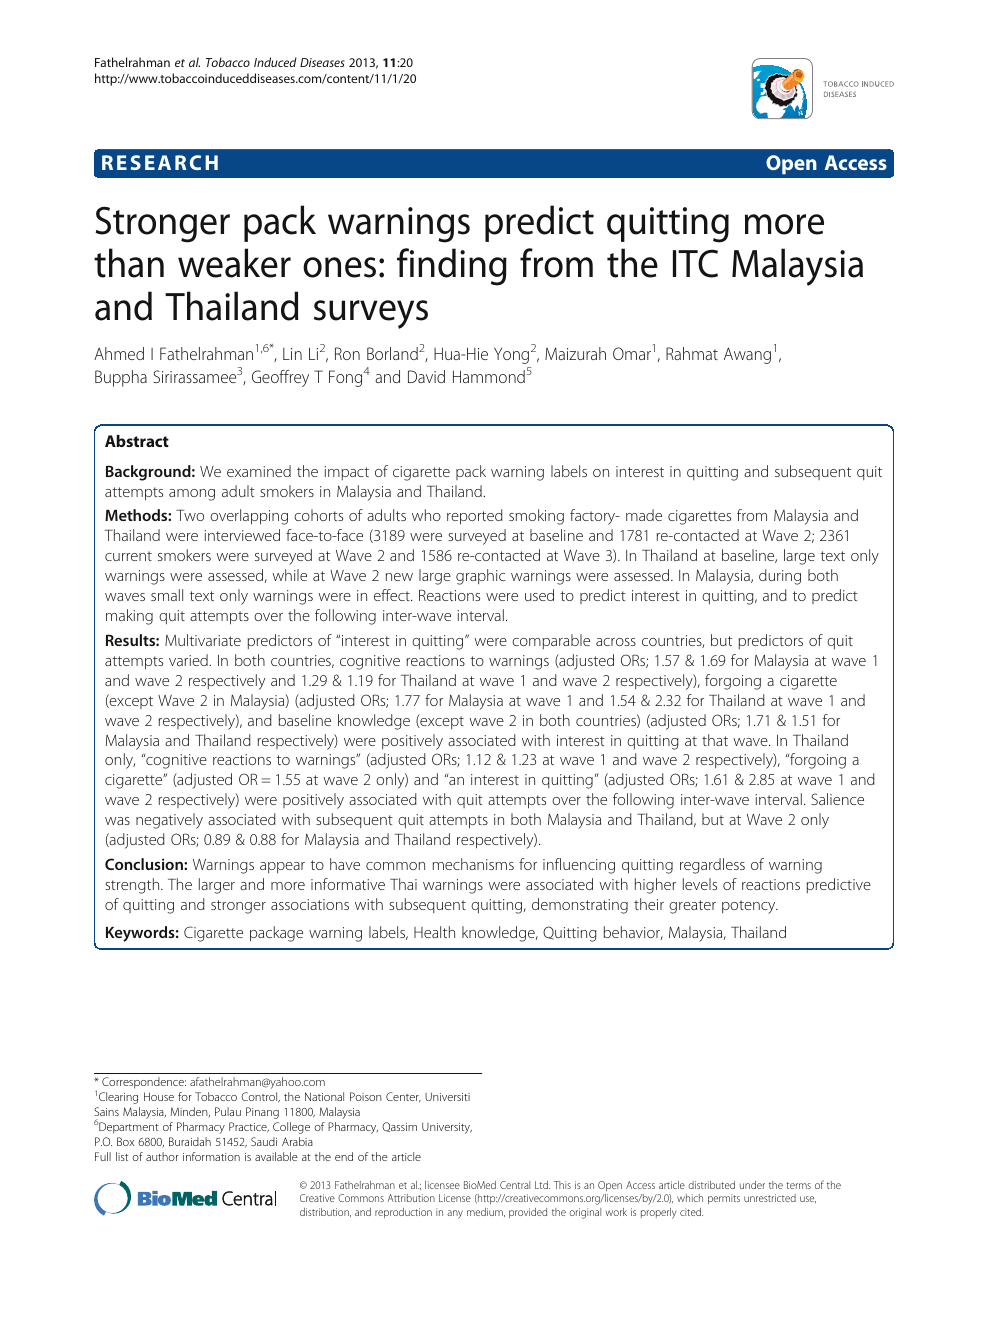 Stronger Pack Warnings Predict Quitting More Than Weaker Ones Finding From The Itc Malaysia And Thailand Surveys Topic Of Research Paper In Health Sciences Download Scholarly Article Pdf And Read For